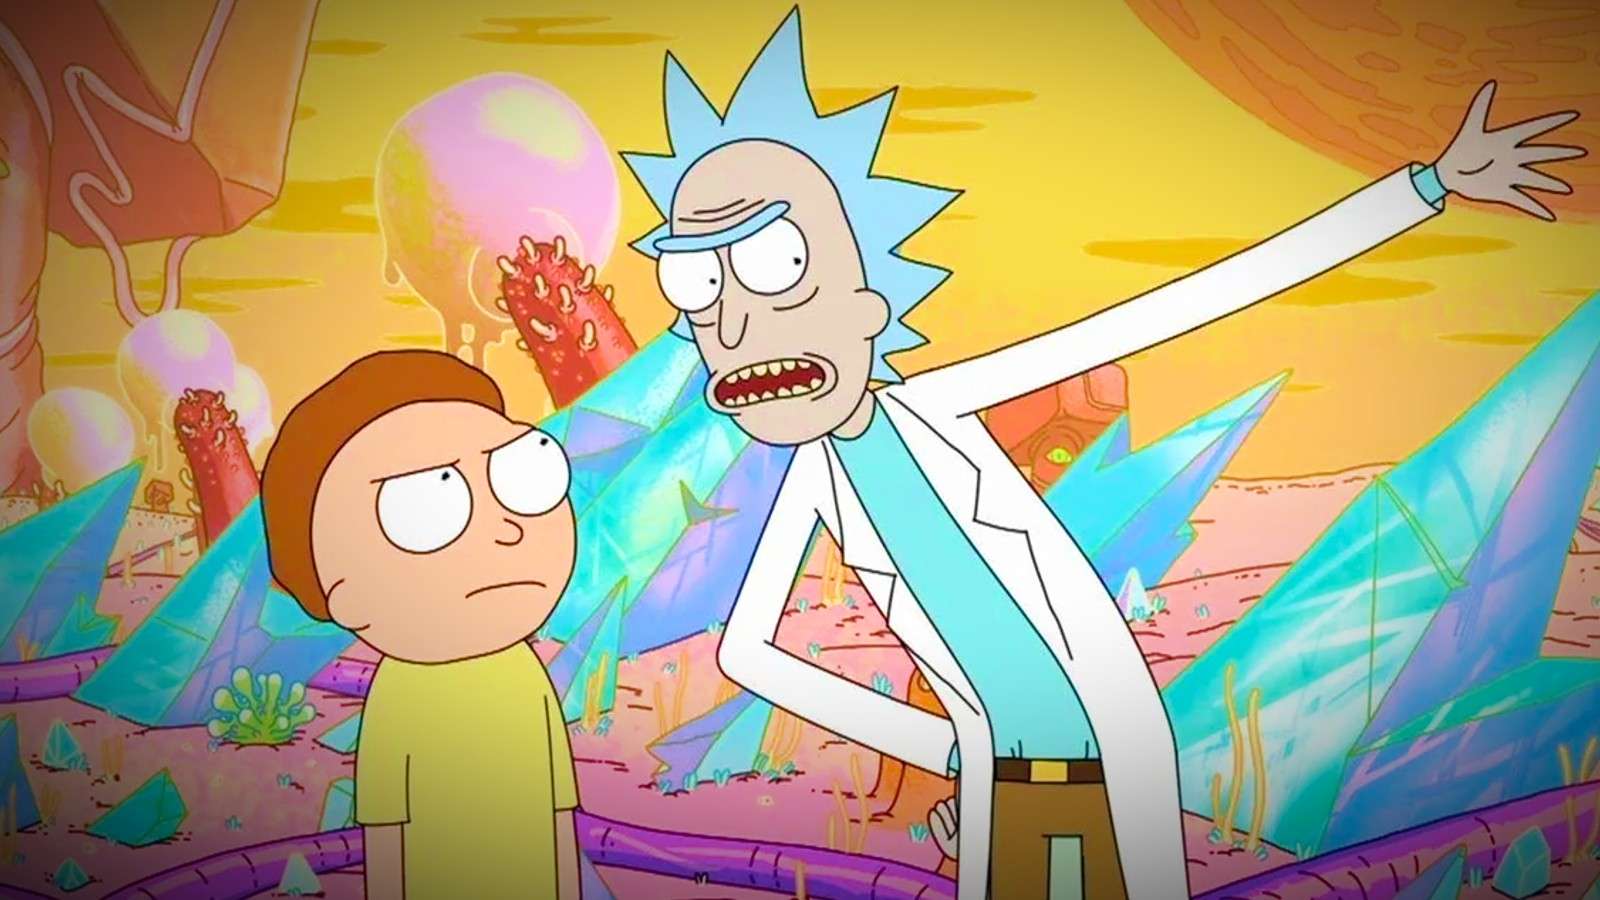 Rick and Morty recasting